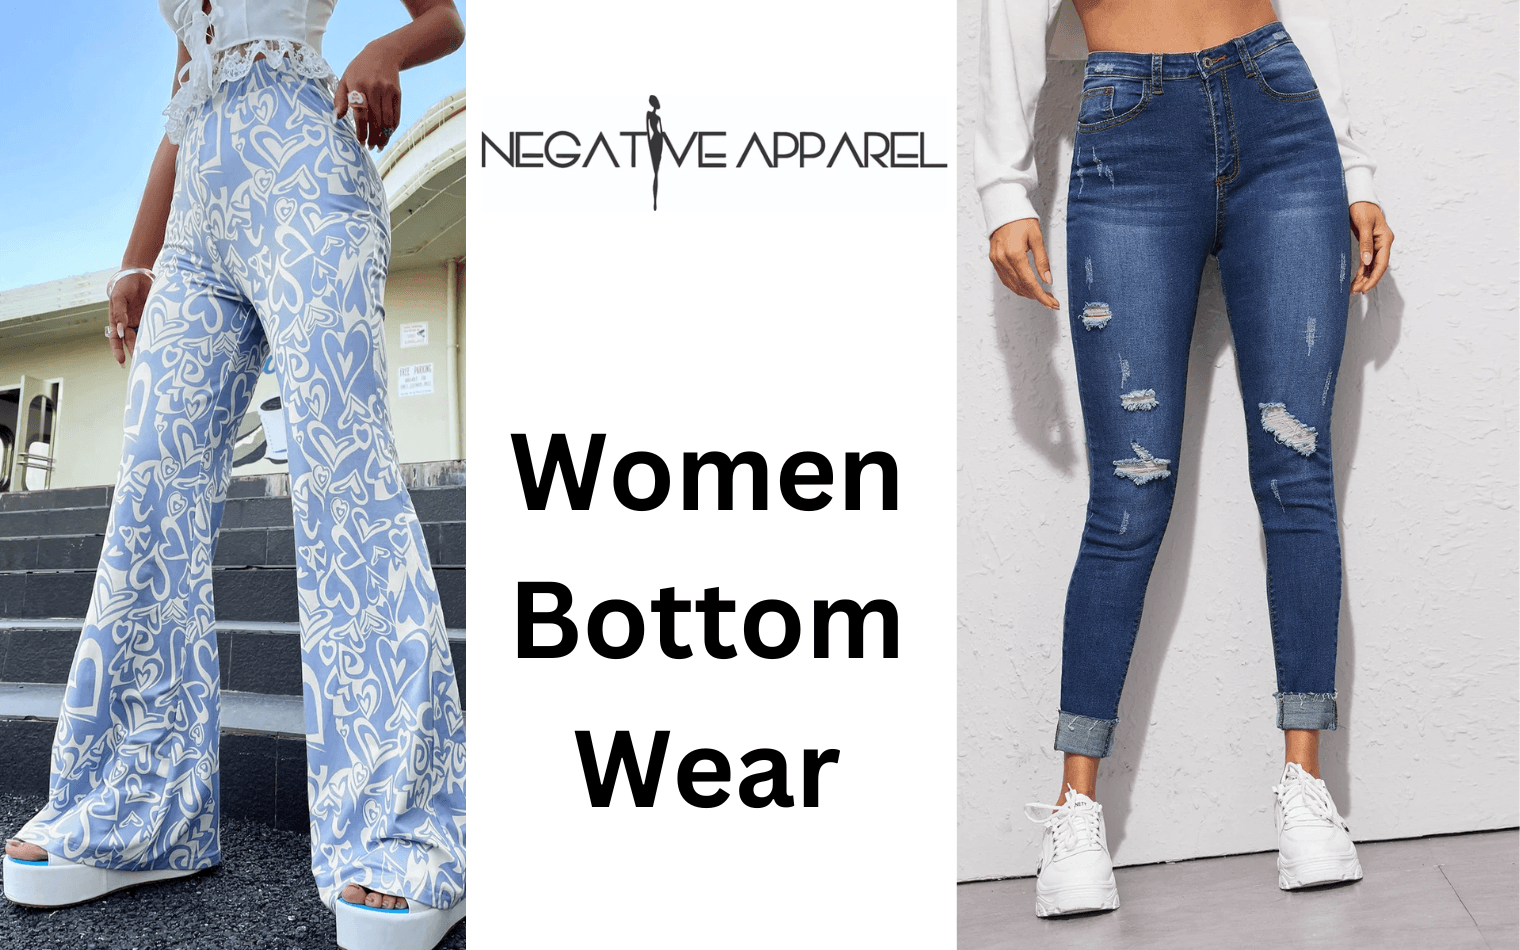 Stylish jeans bottoms wear for ladies - Negative Apparel